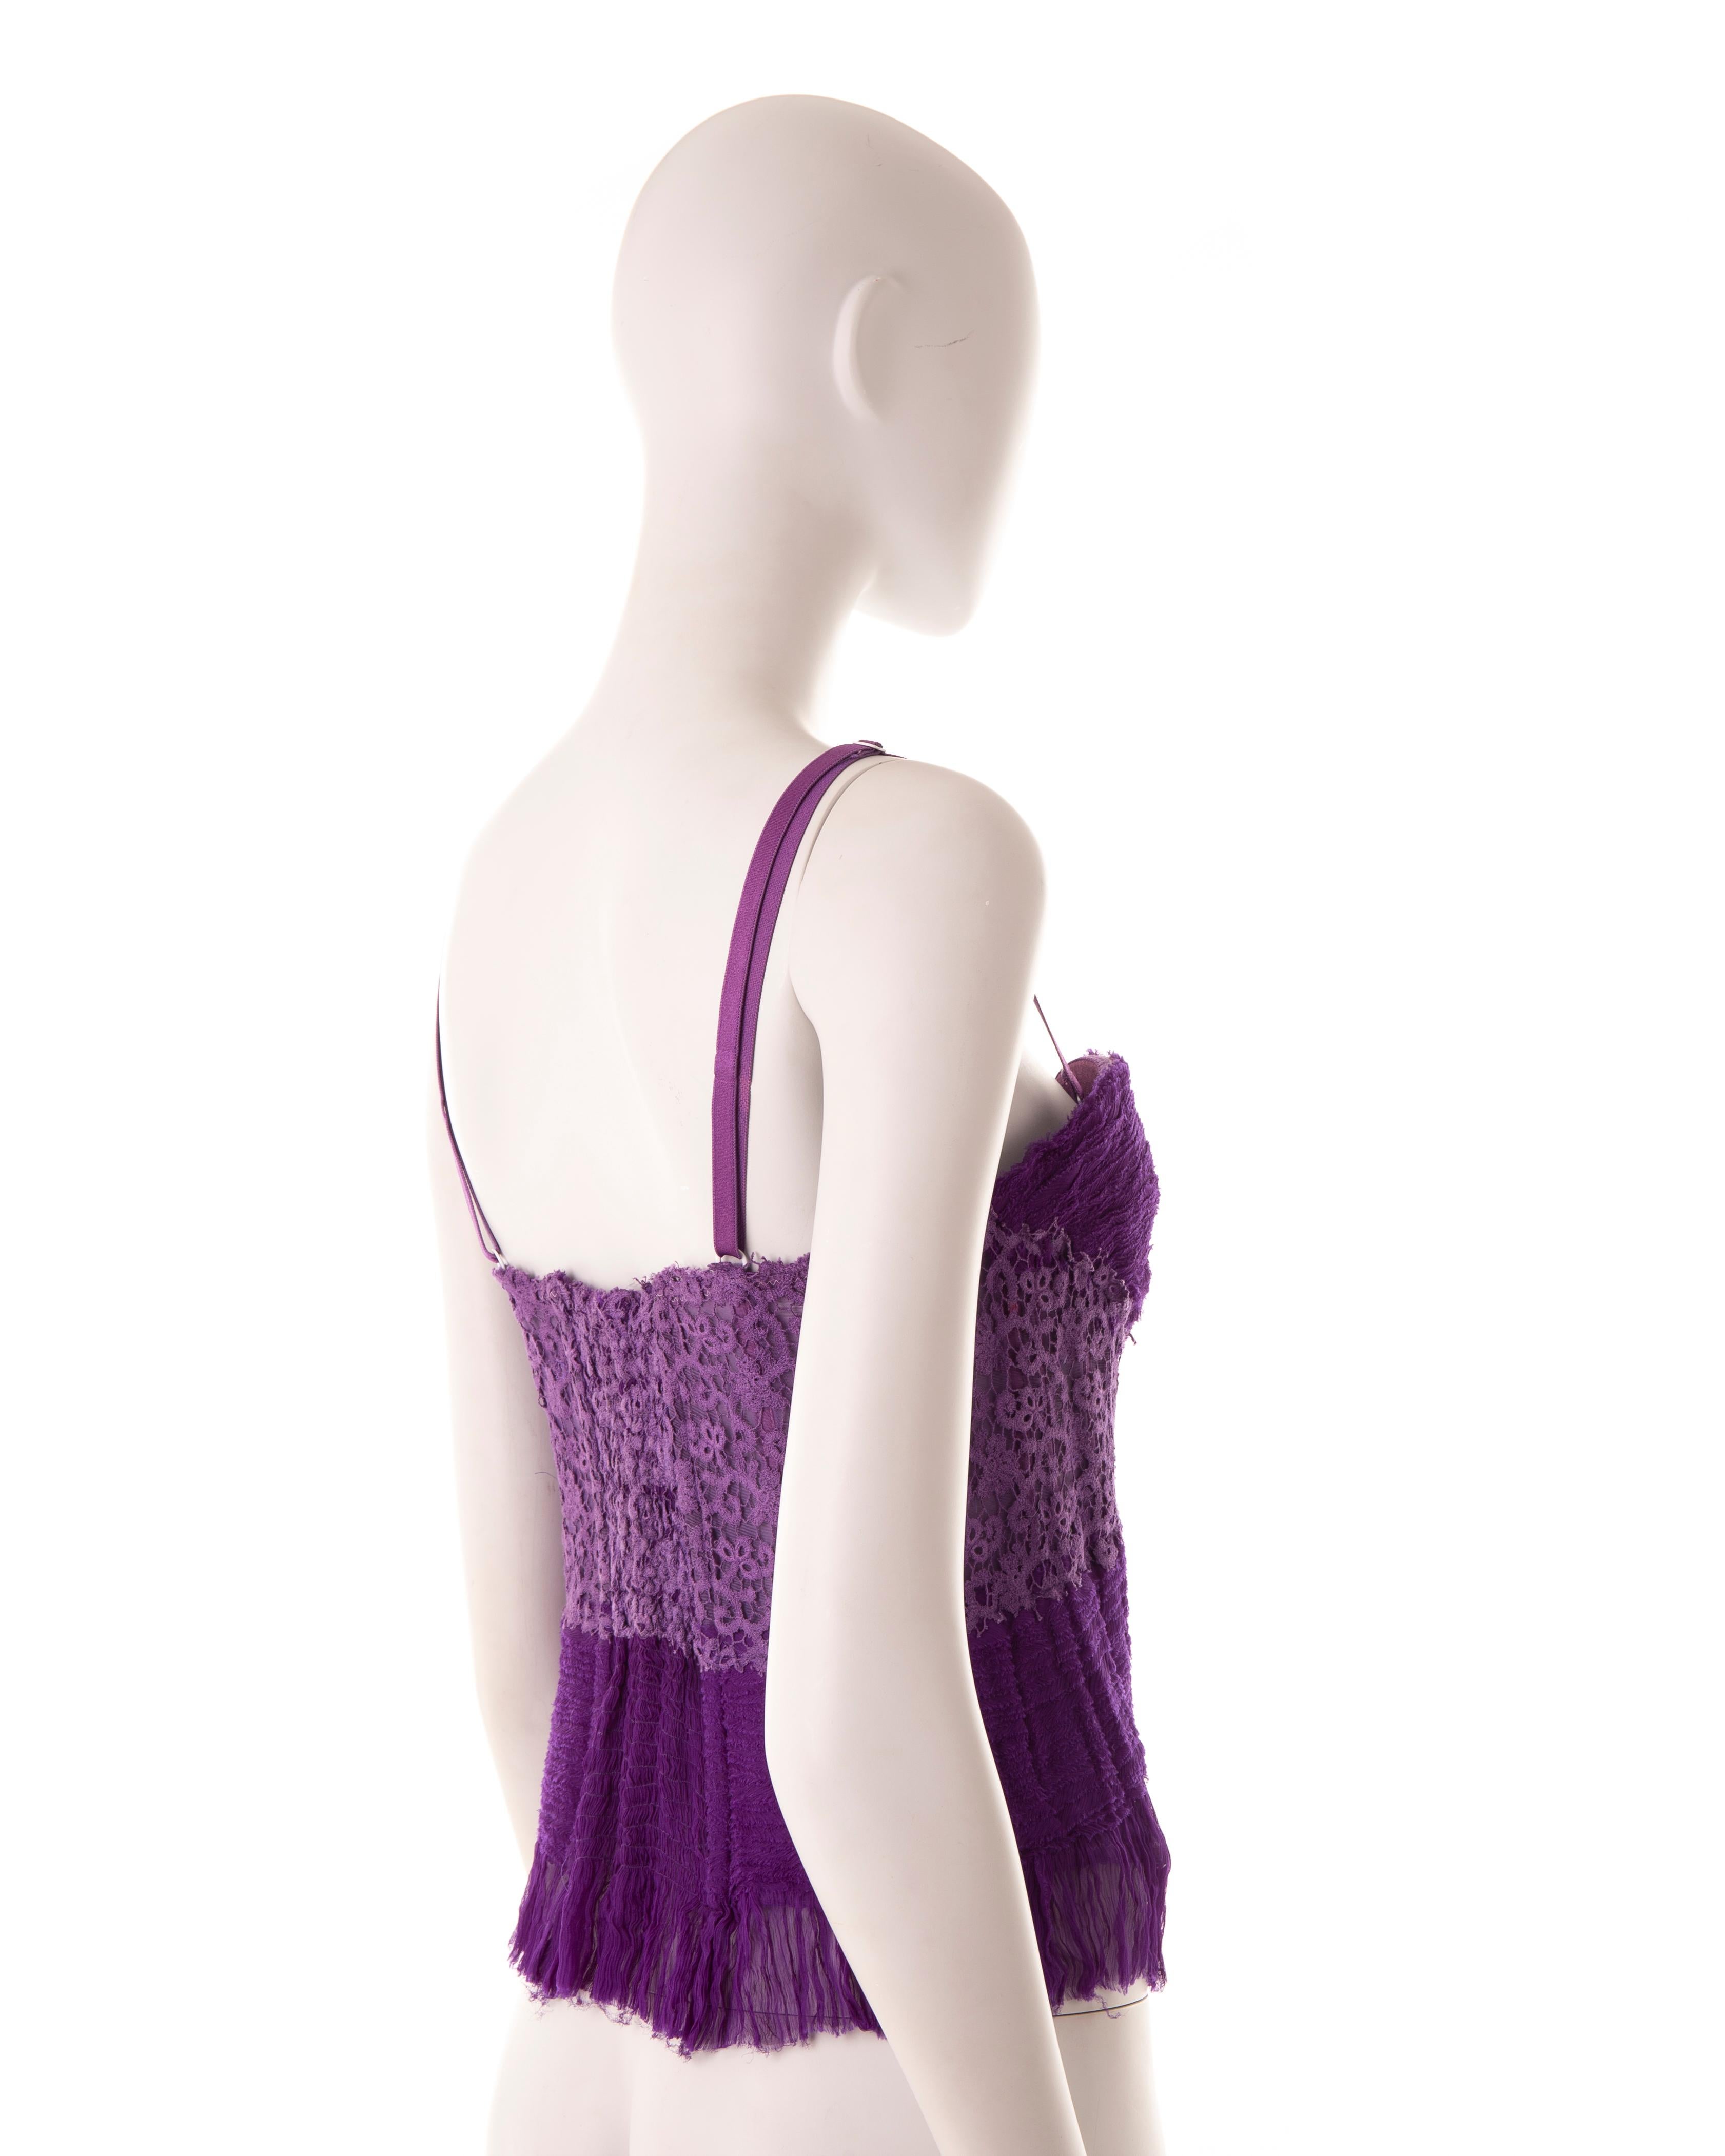 Women's Ermanno Scervino S/S 2006 purple ruched chiffon and lace corset For Sale